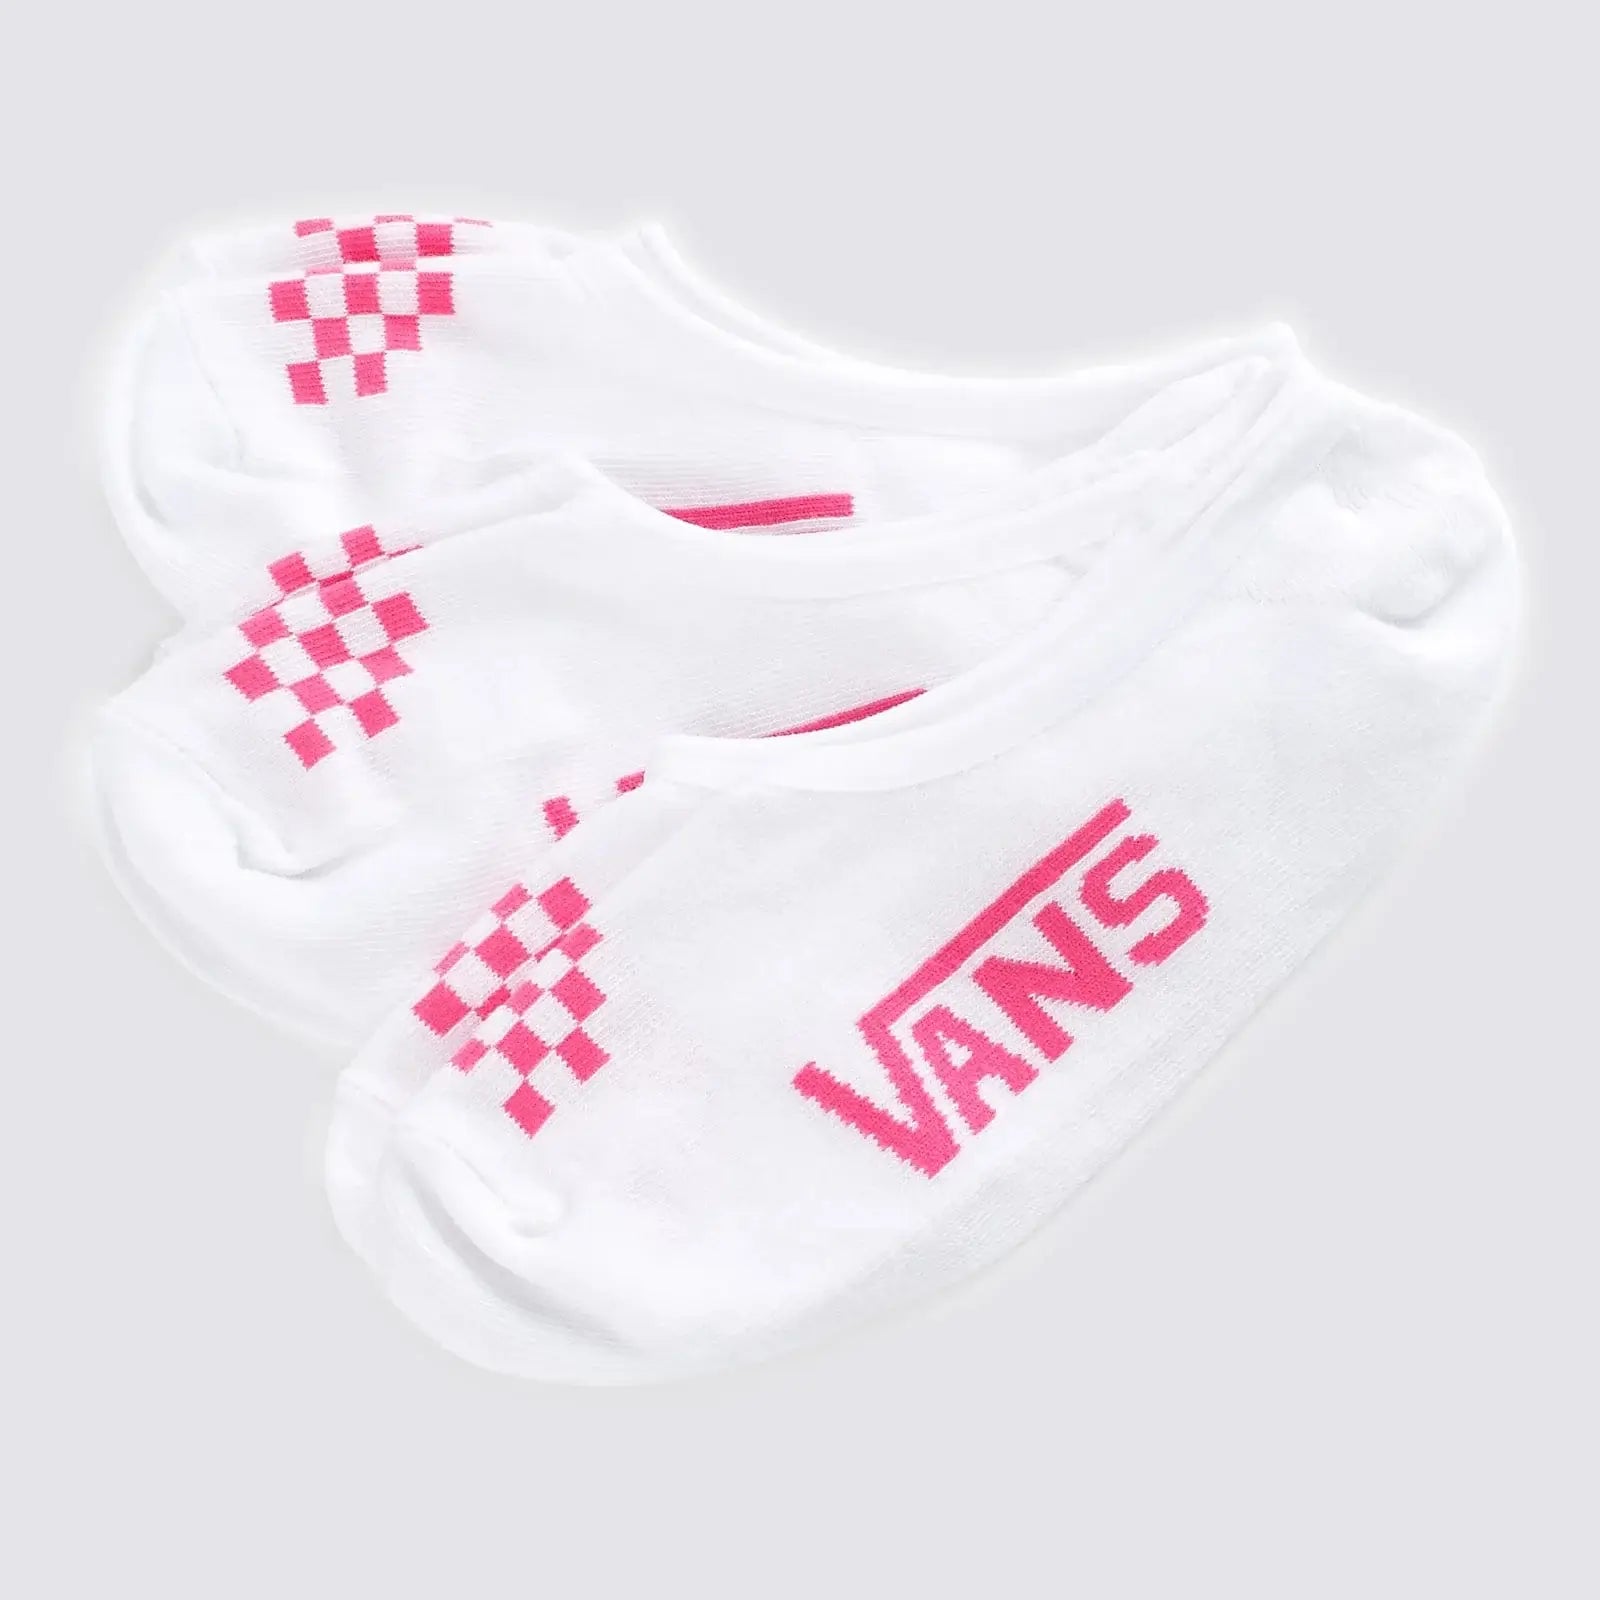 VANS Apparel & Accessories Wild Orchid checkered VANS "Off The Wall", 3 Pack Sock